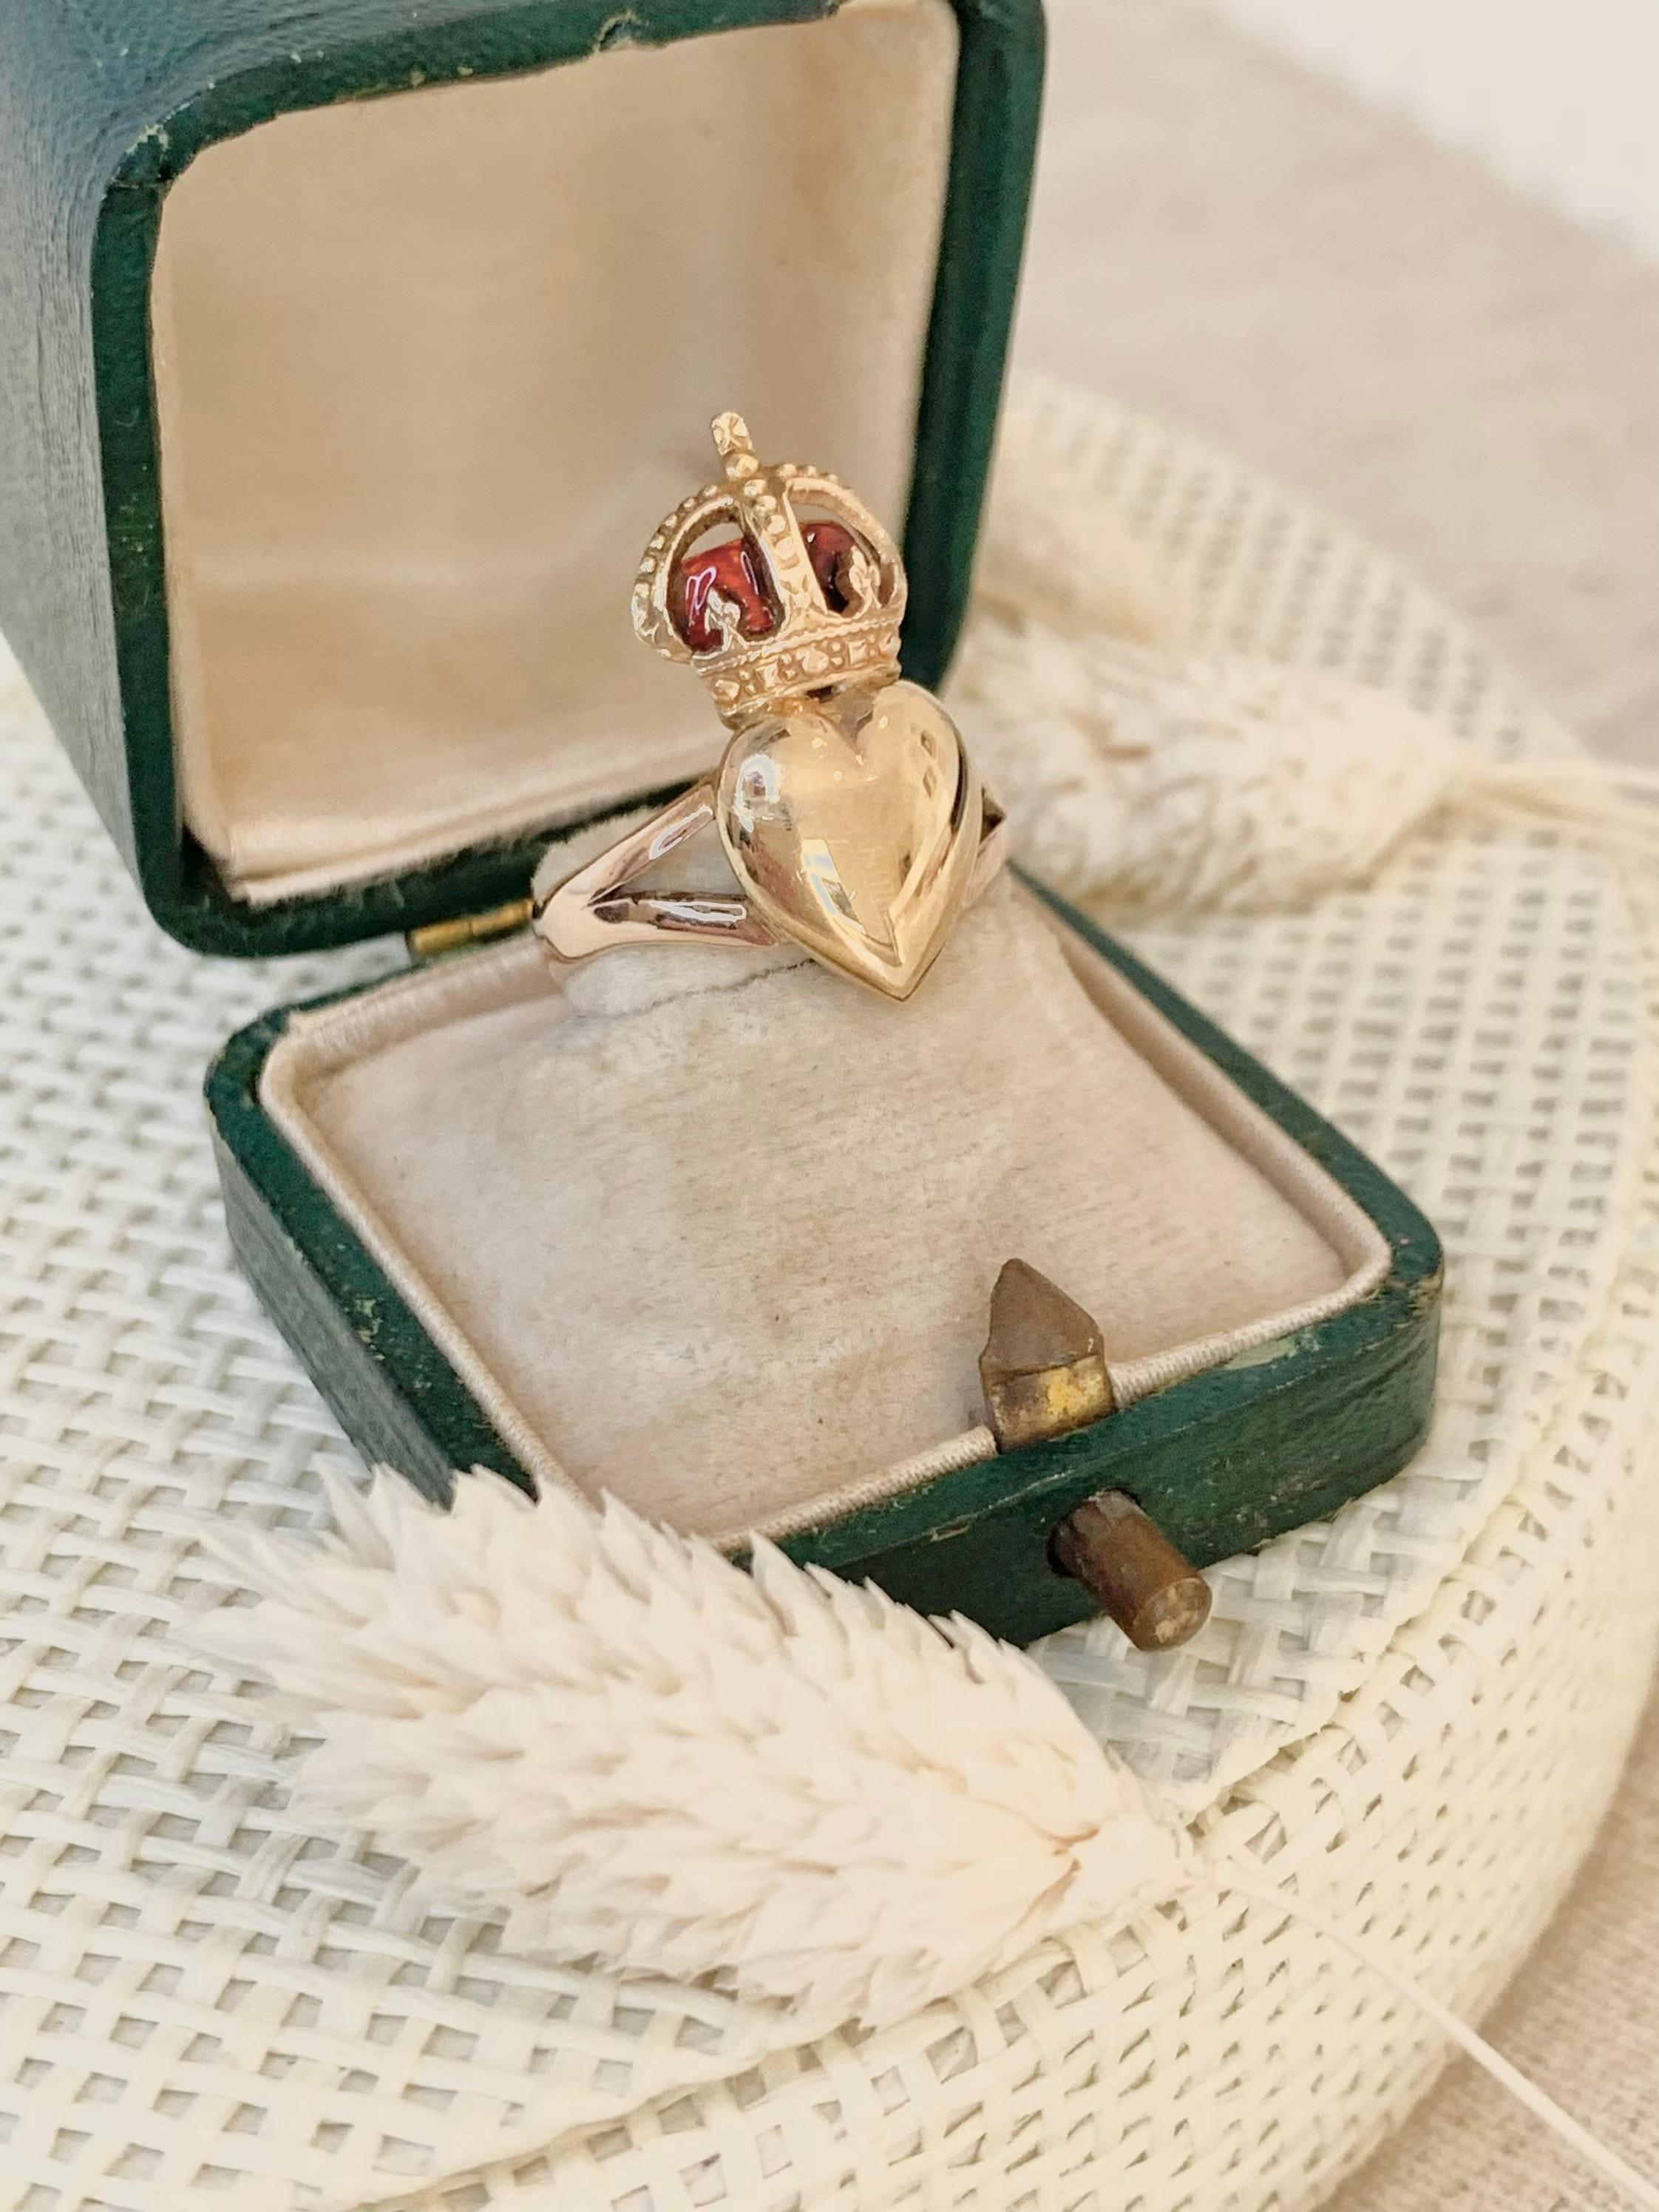 Antique Crowned Heart Ring

Victorian Circa 1880

9ct Gold

Beautiful Gold Heart with Red Enamel & Gold Crown
Measures Approx Height 21mm & 9.2mm Wide 

UK Size K

US Size 5 1/2

Would Make a Fabulous Pinky Finger Ring

Can be resized using our